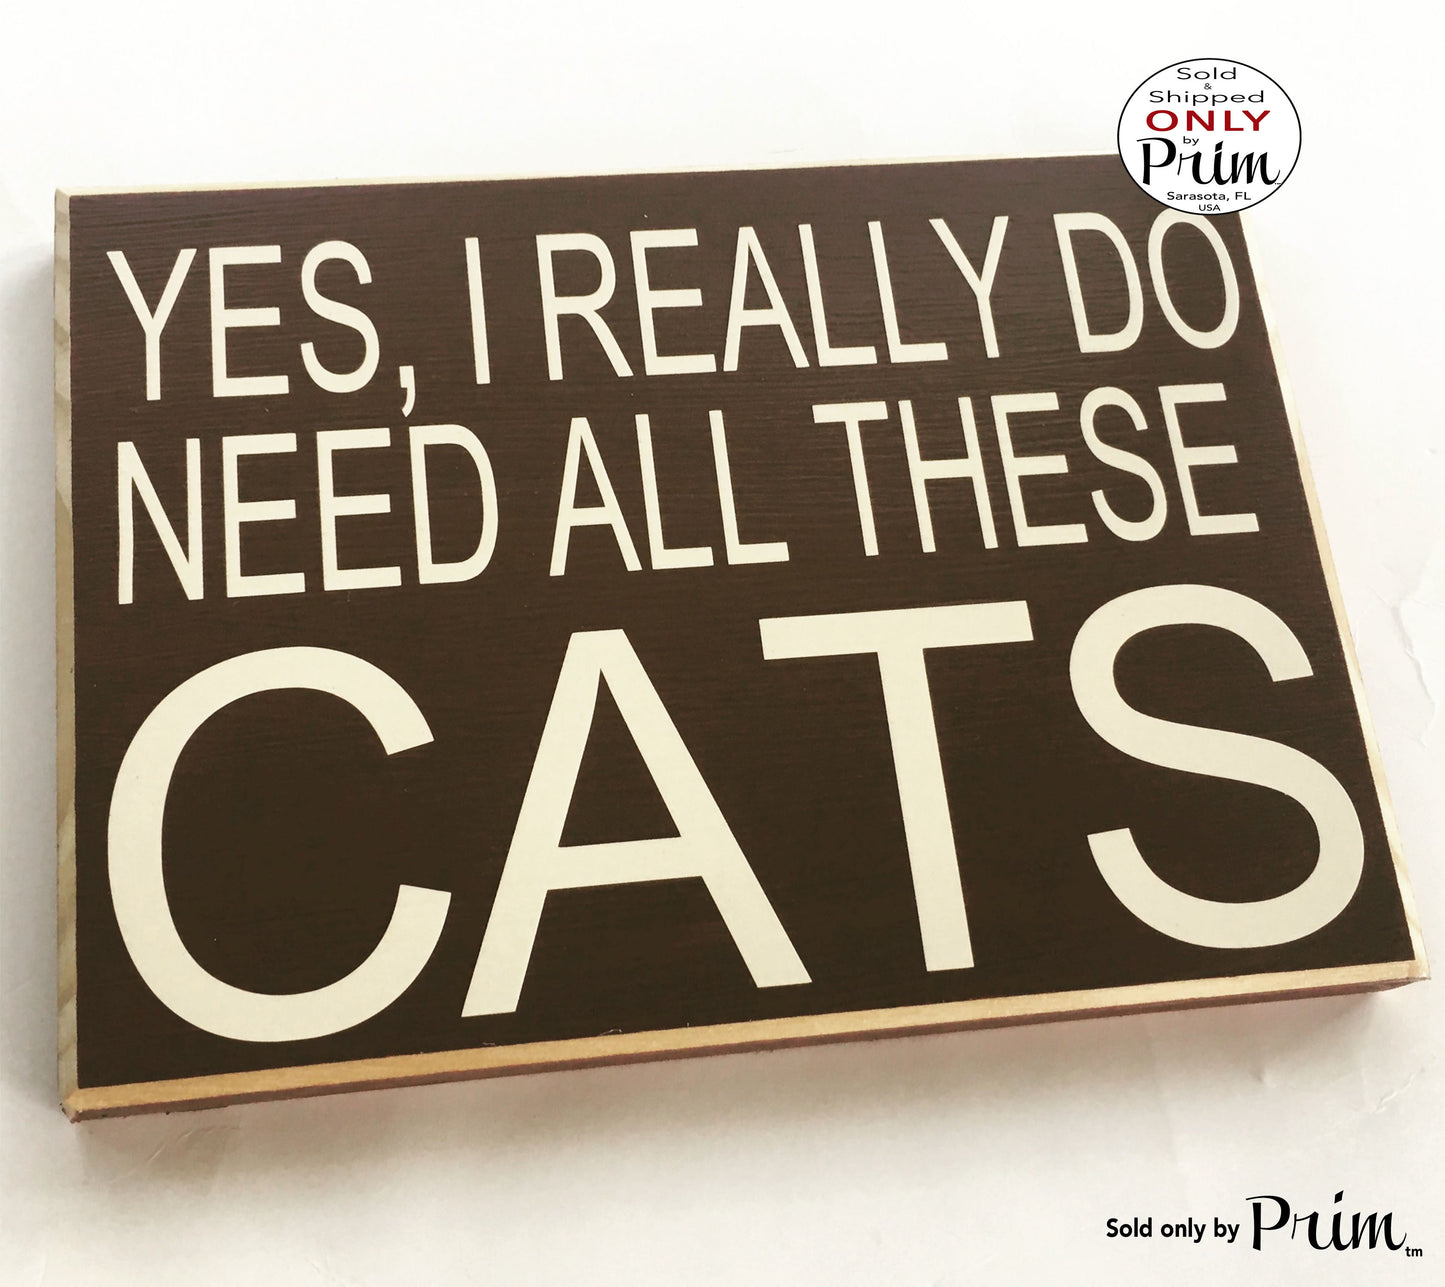 10x8 I really do need all these cats Custom Wood Sign Cat Lover Animal Pets Funny Welcome Kittens Wall Decor Plaque